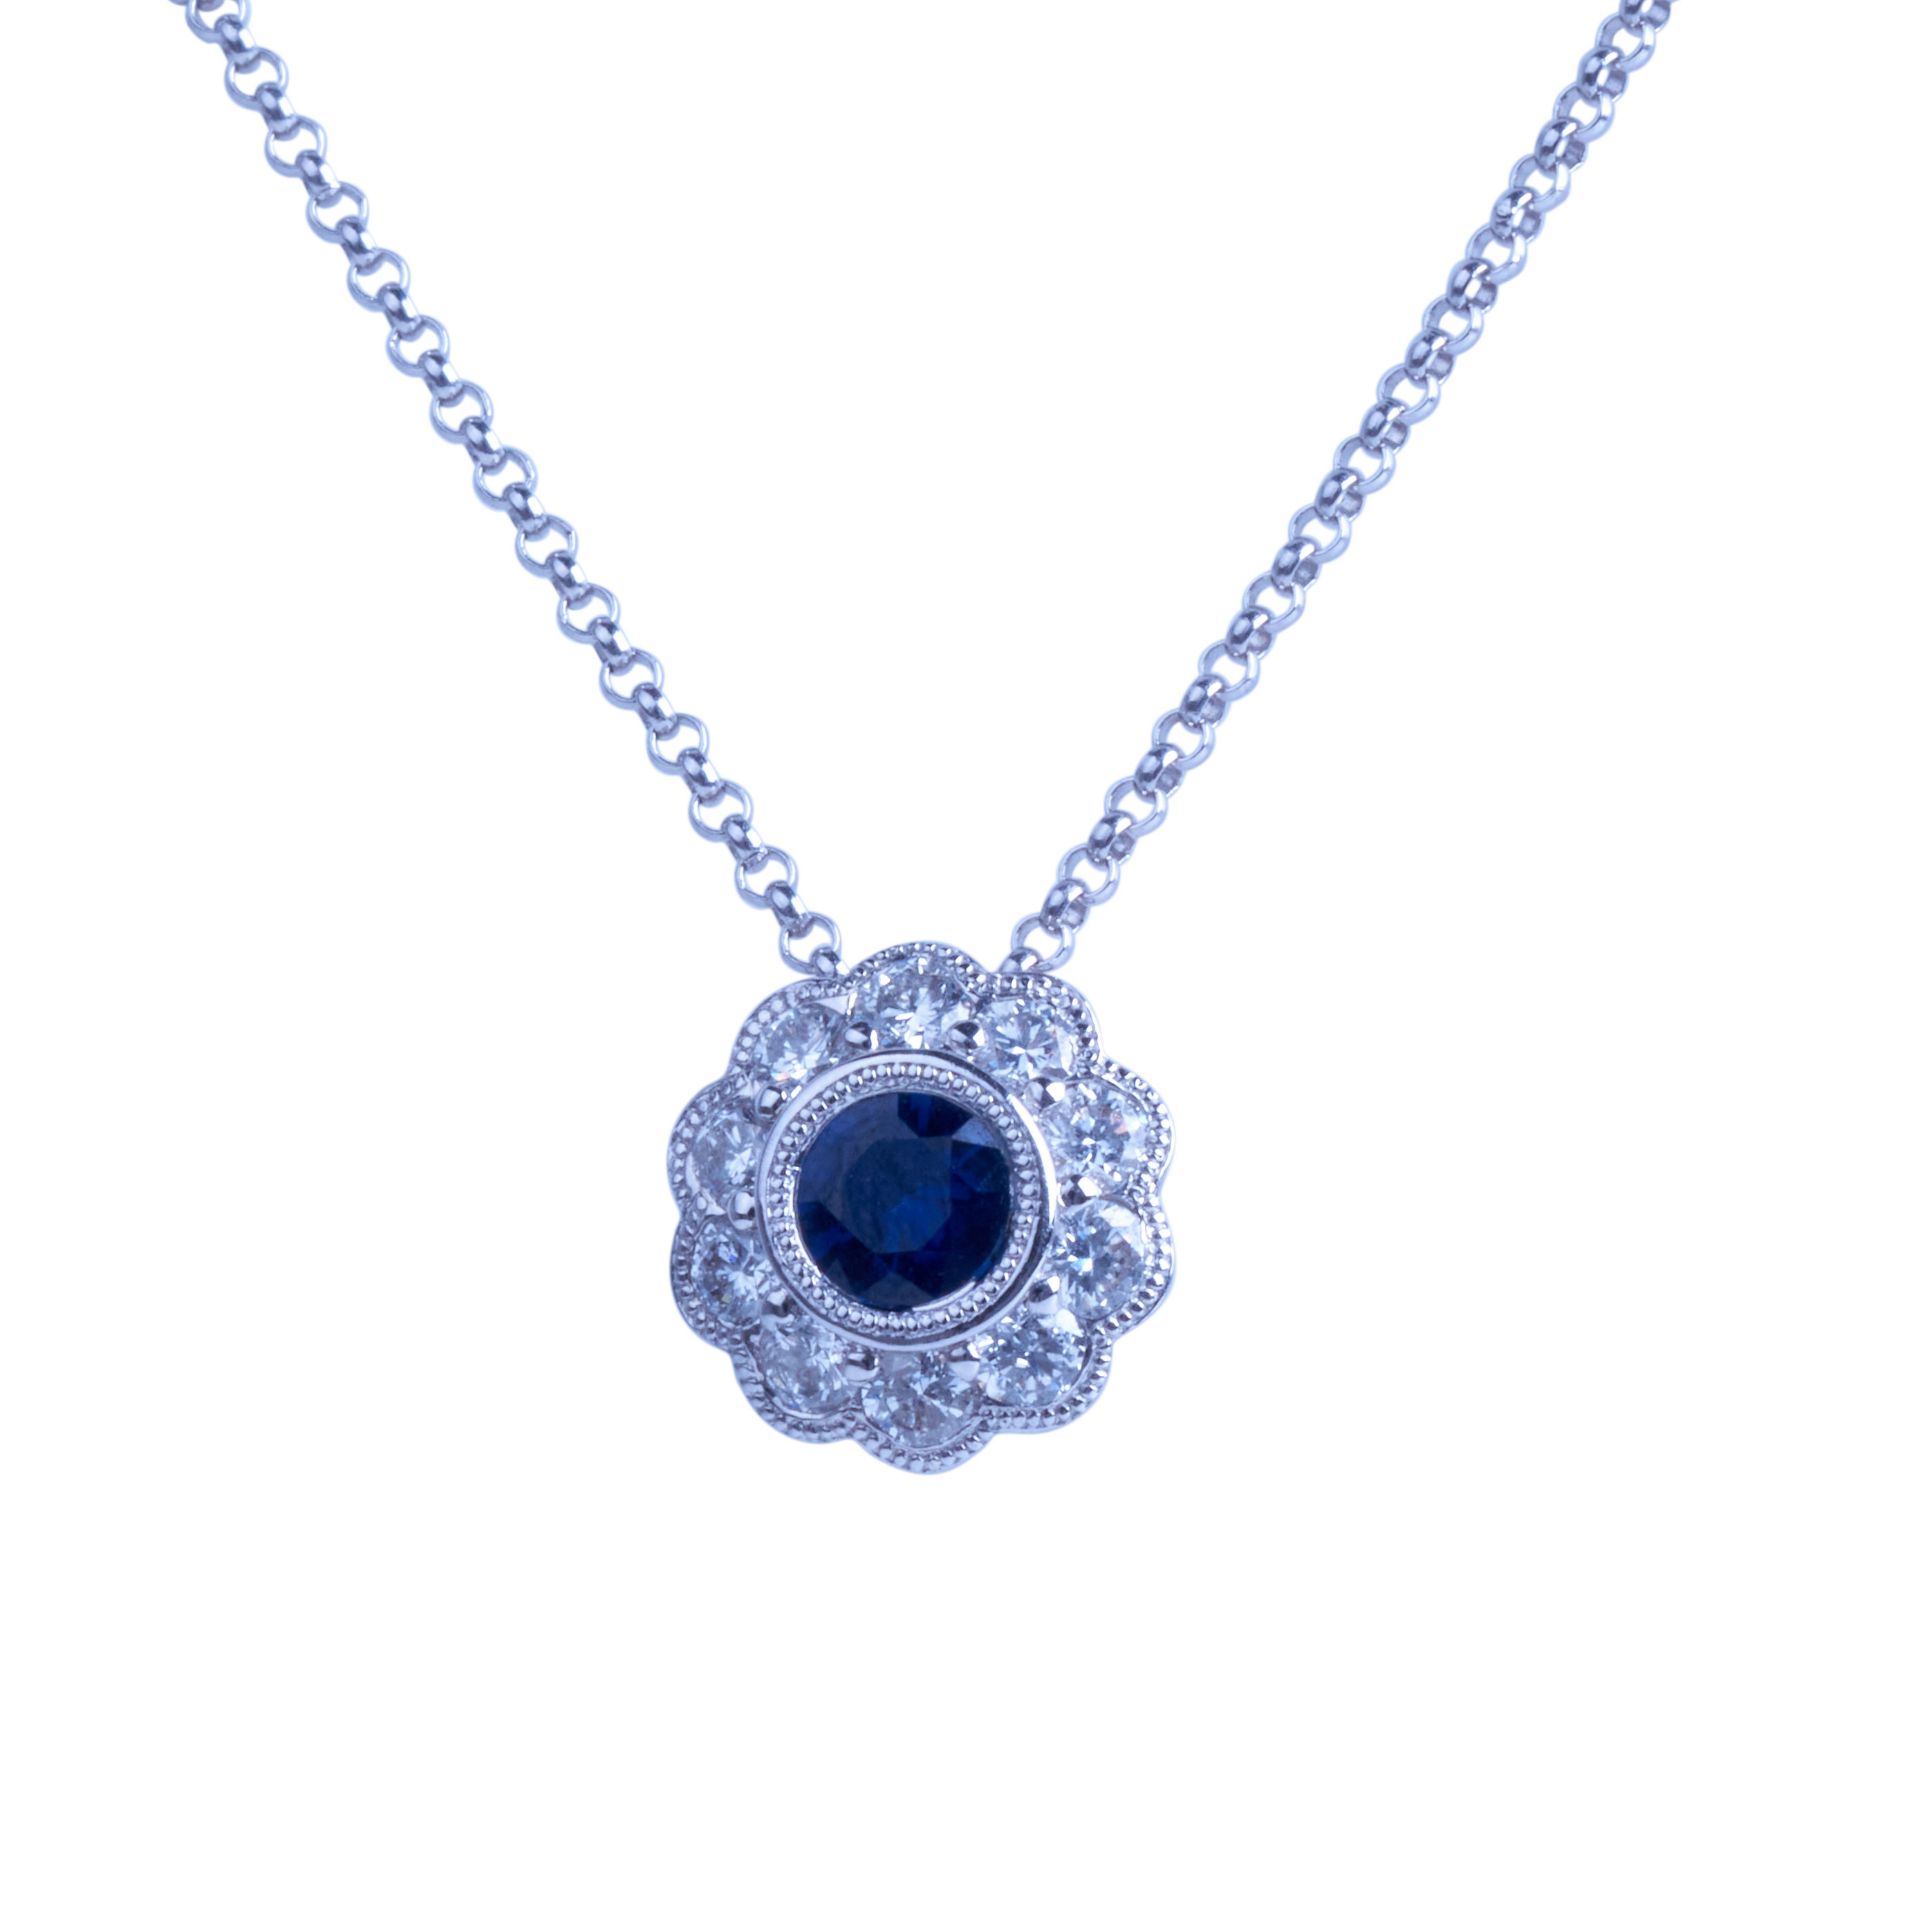 18CT WHITE GOLD BLUE SAPPHIRE AND DIAMOND PENDANT WITH CHAIN